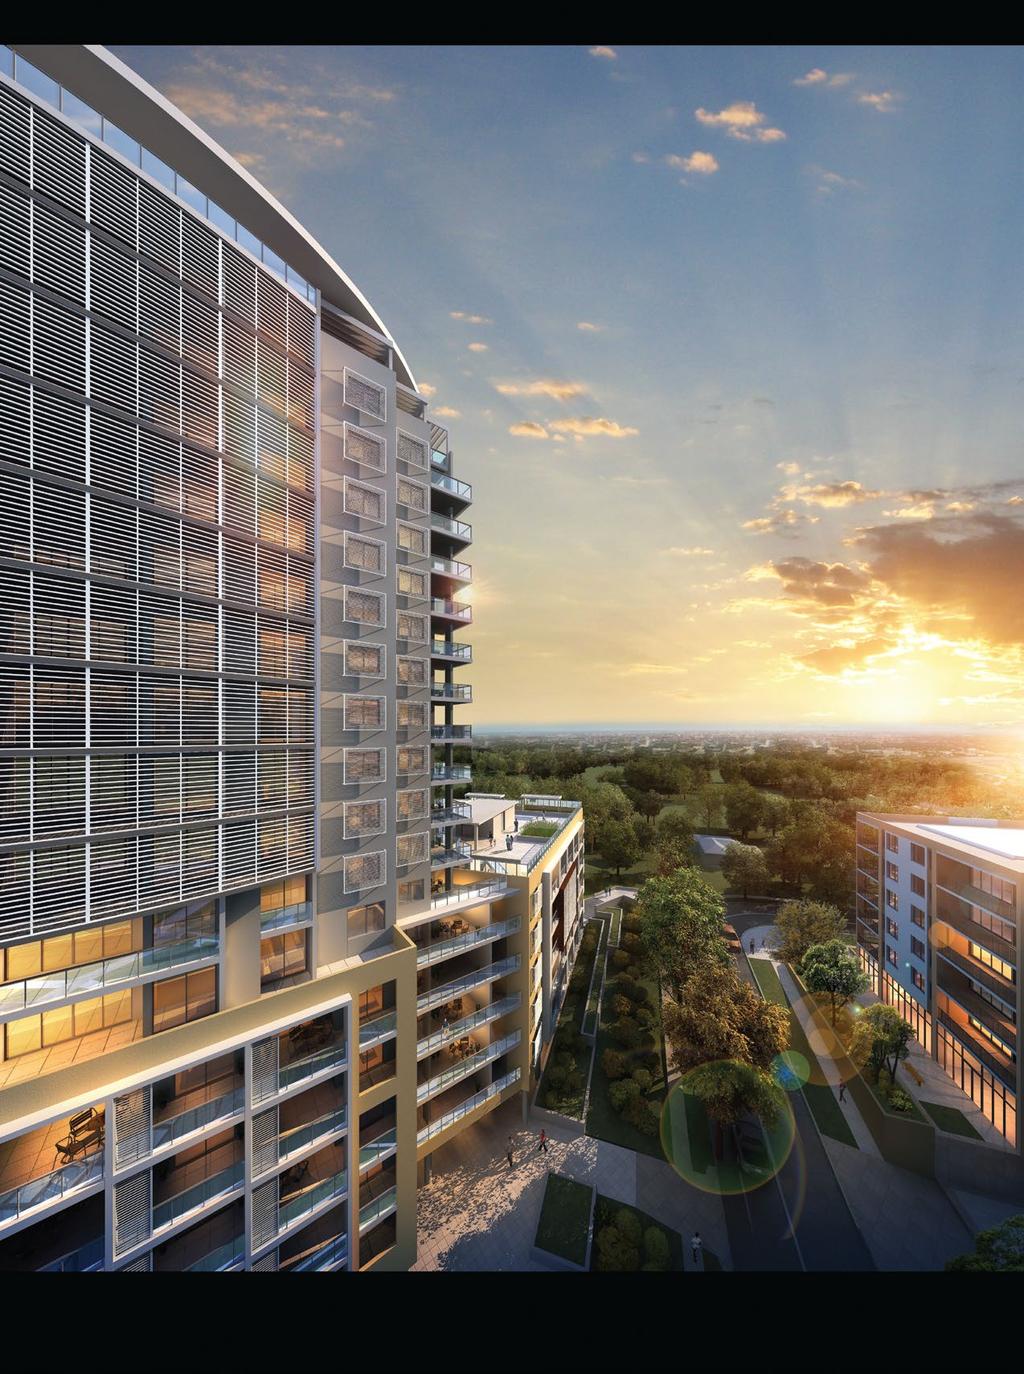 As an Australian business success and one of the largest private developers in Australia, the company excels at delivering high quality, sustainable residential, commercial and retail projects.